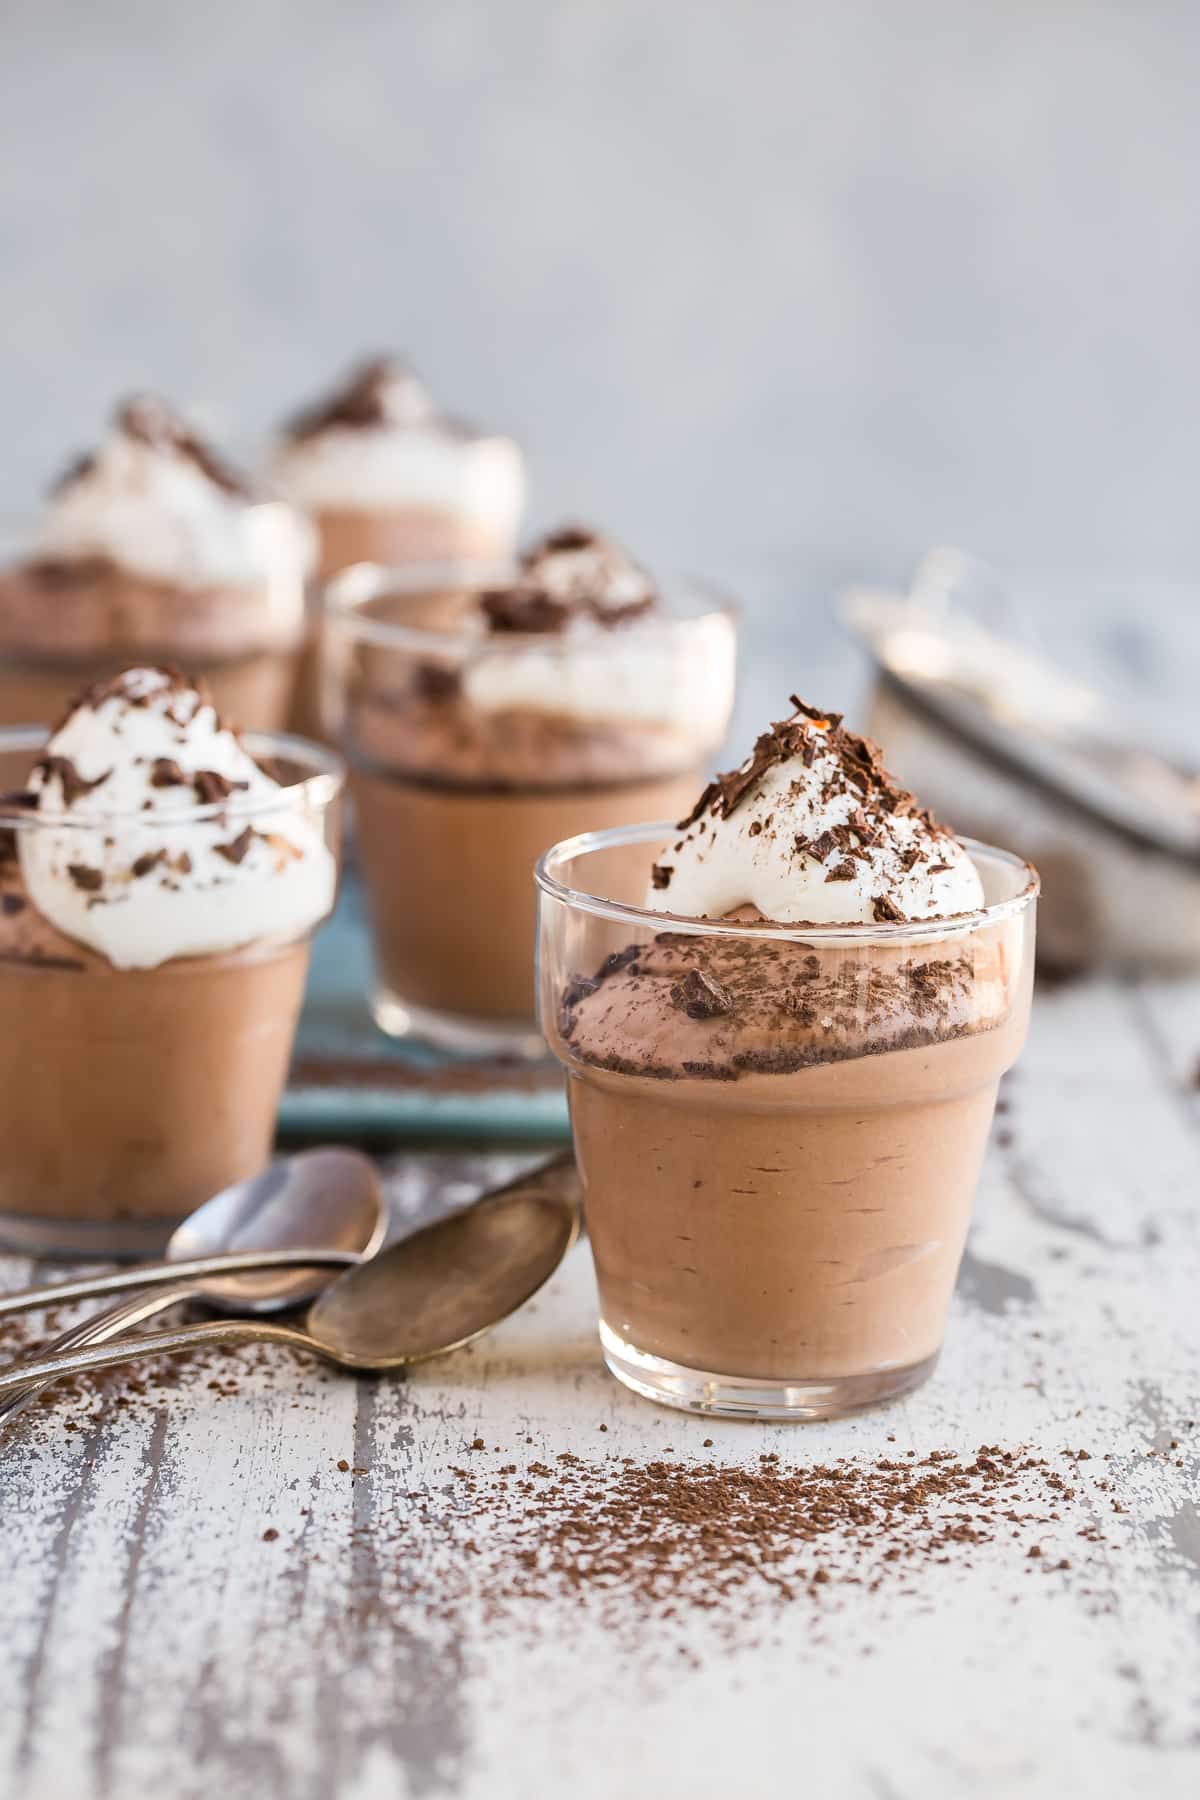 Small cups of chocolate mousse next to spoons.